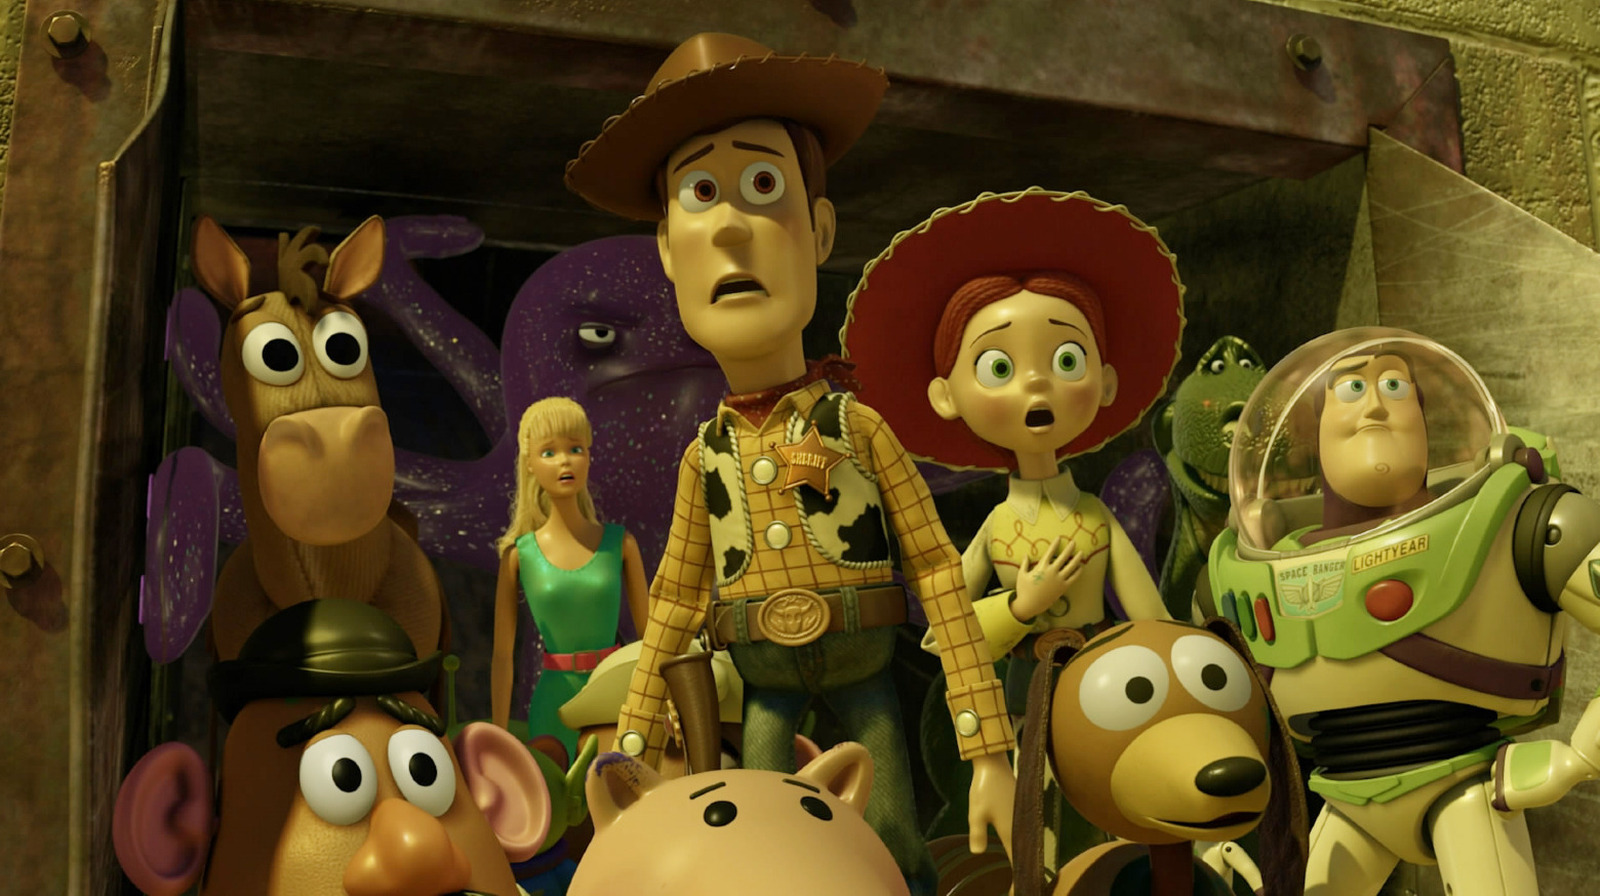 Toy Story 3 Teased A Pixar Movie We'll Probably Never See